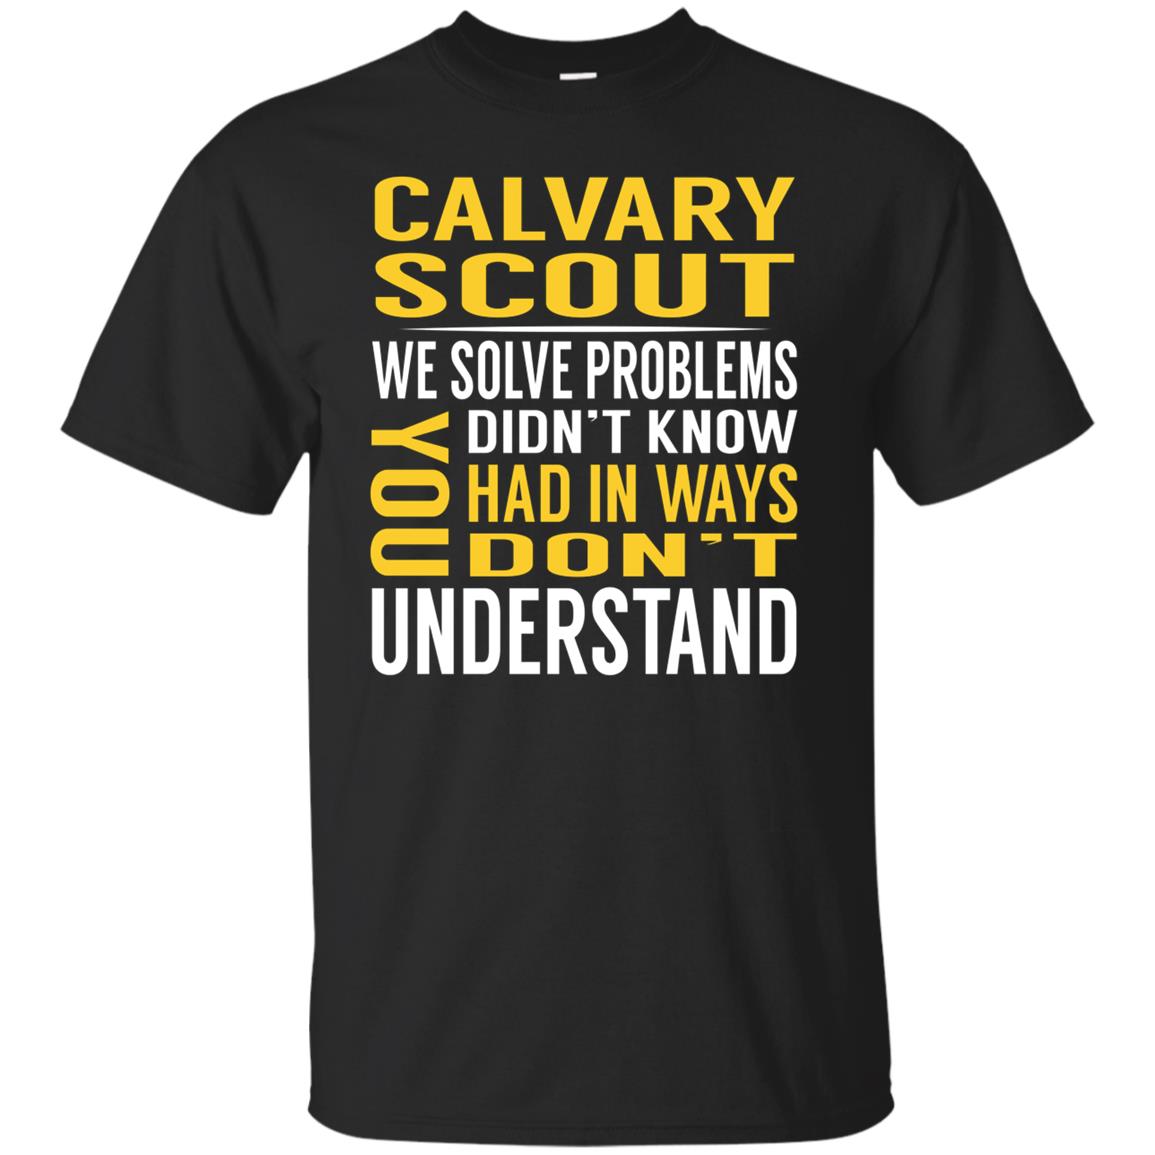 Calvary Scout Solve Problems T Shirt